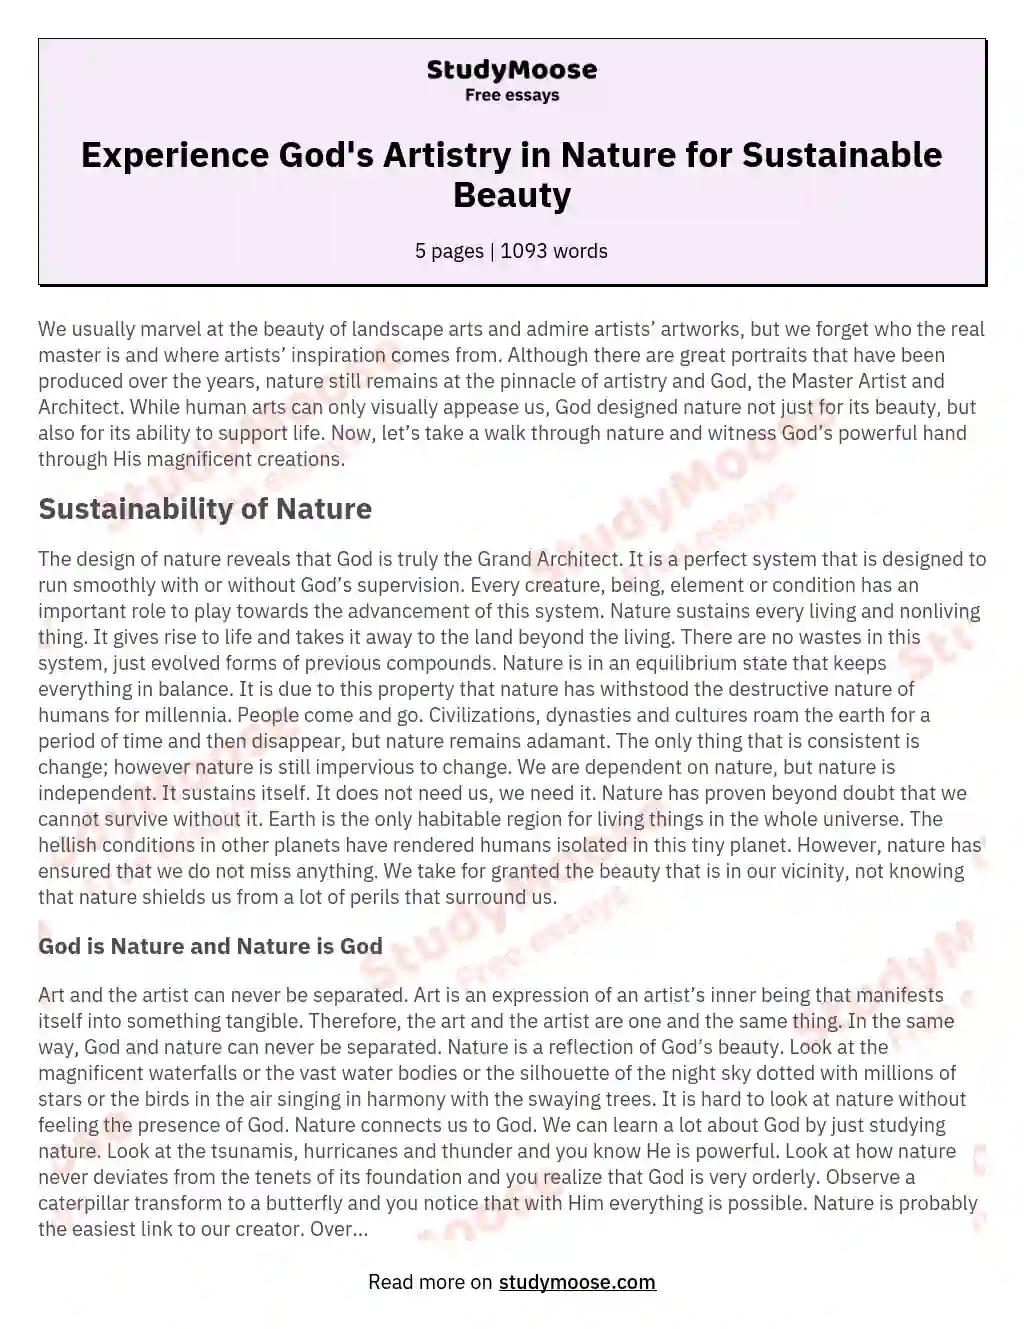 Experience God's Artistry in Nature for Sustainable Beauty essay